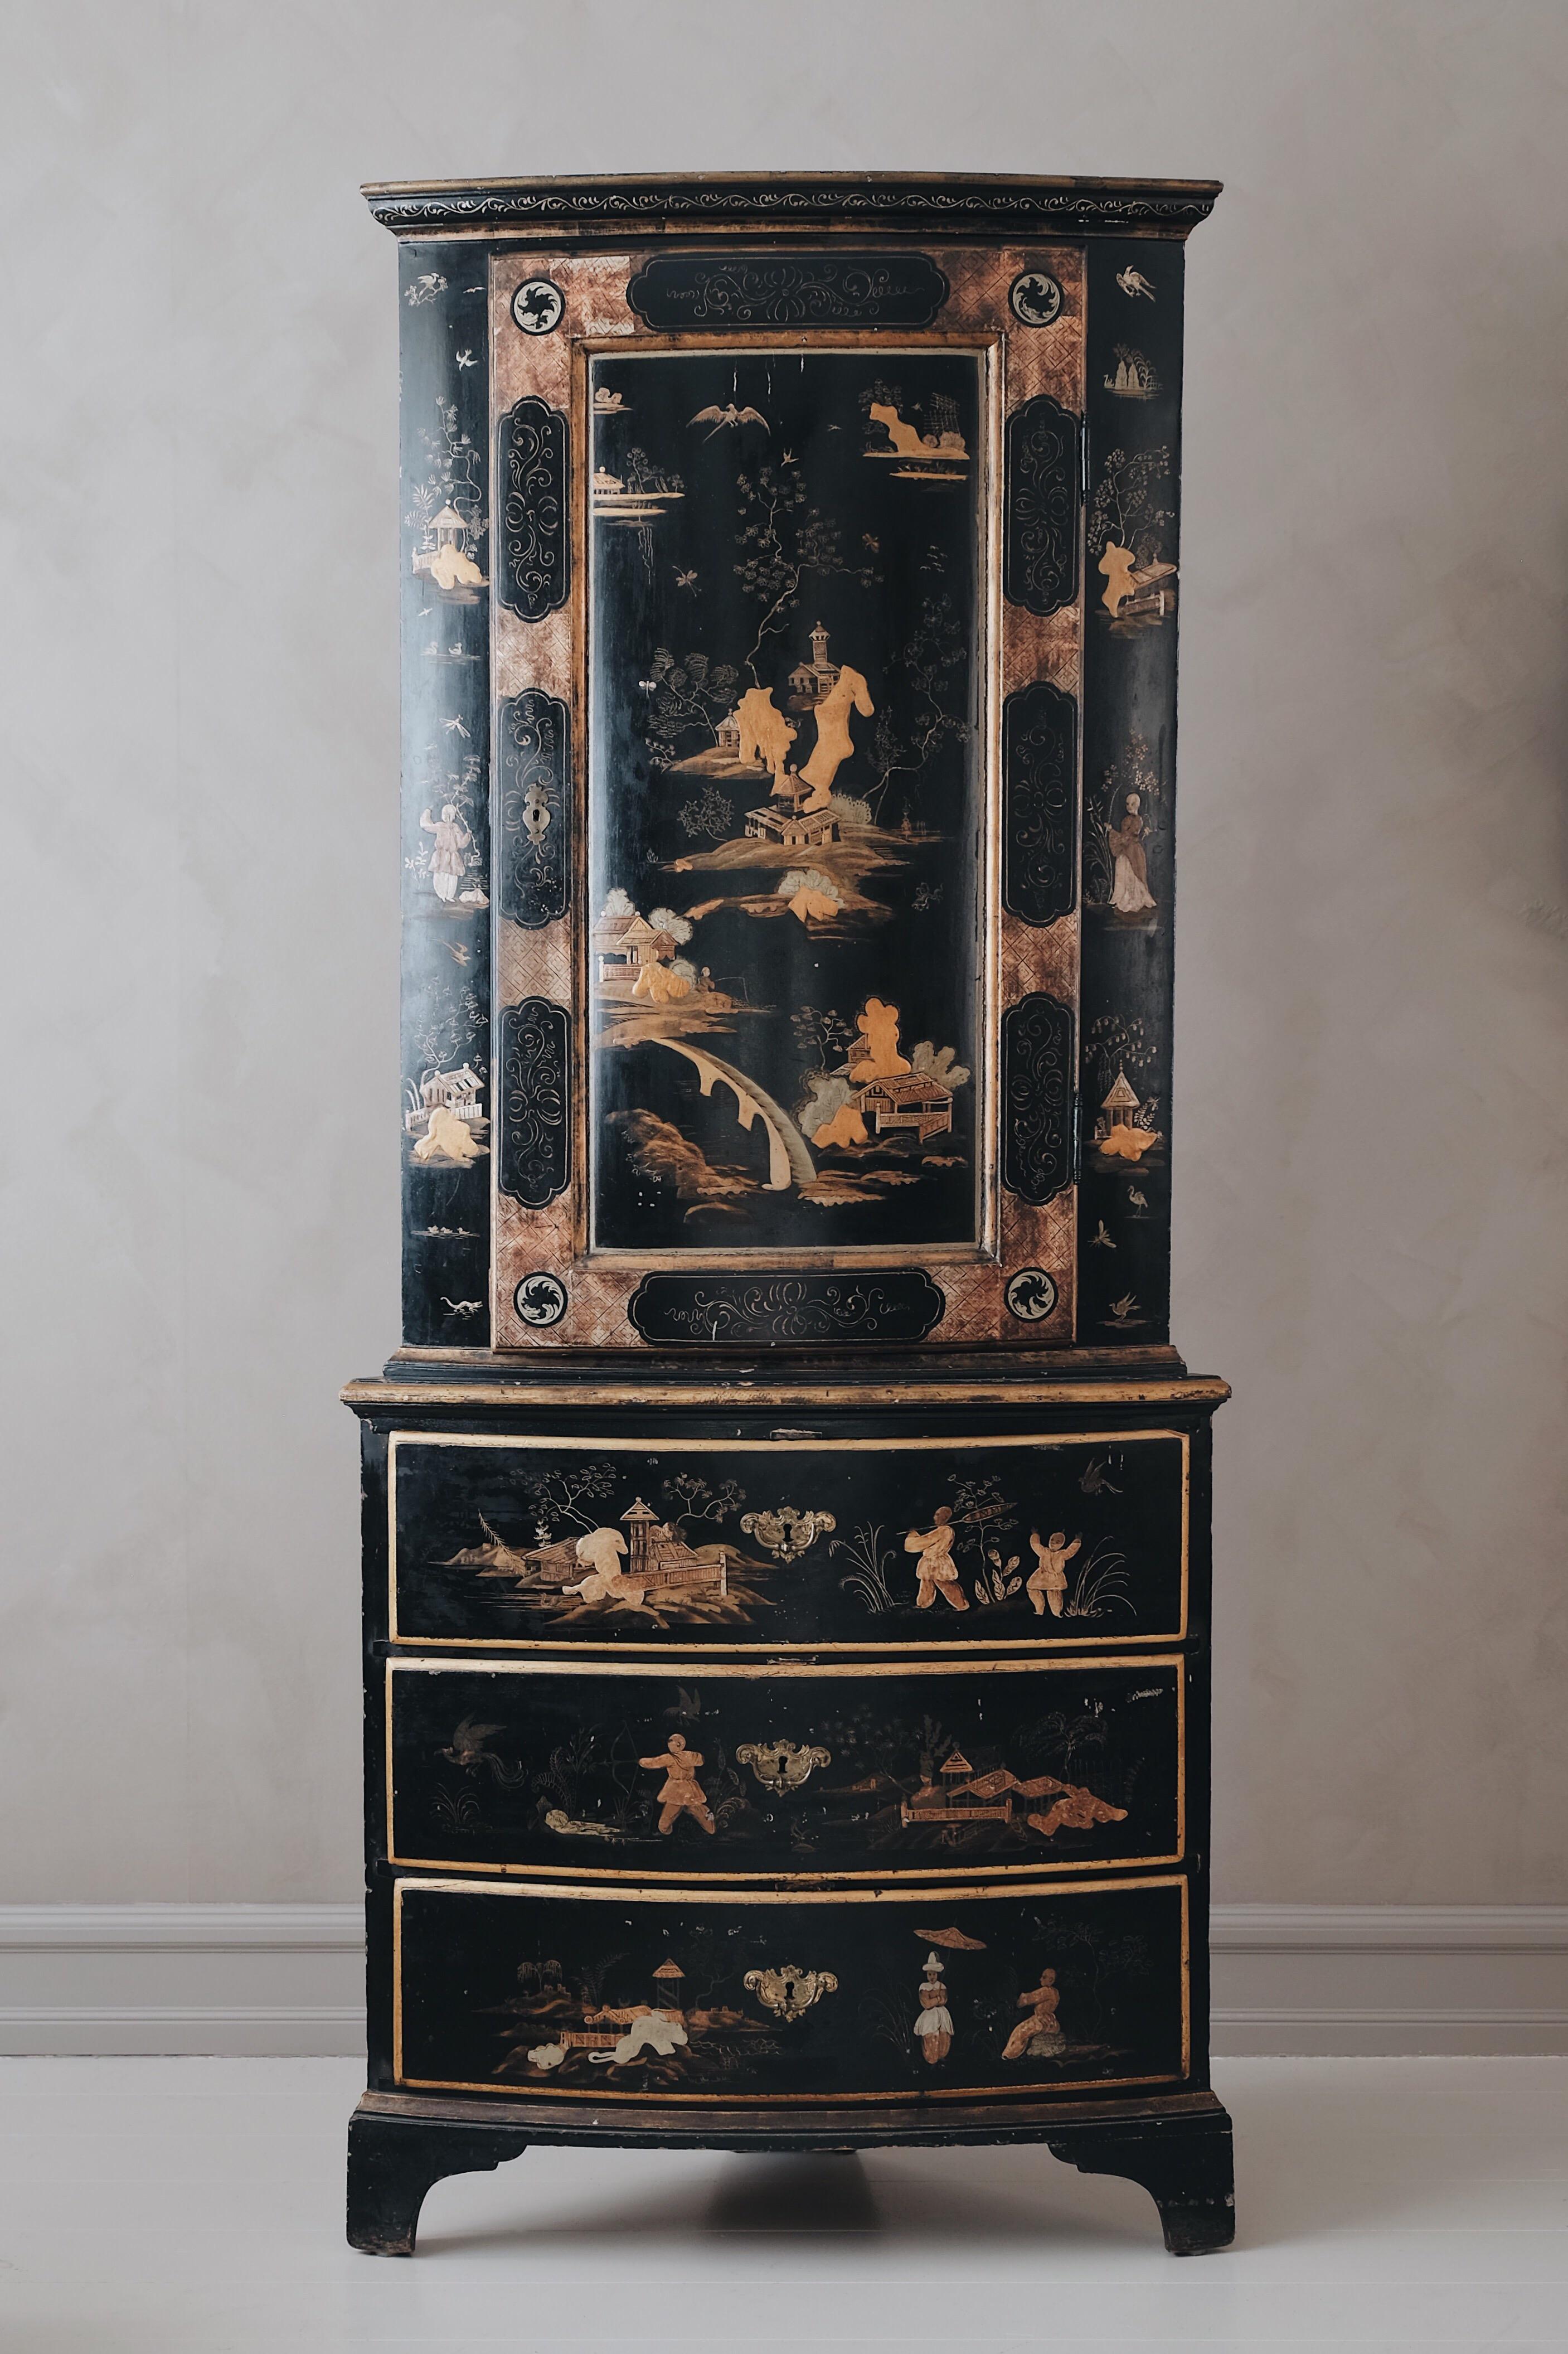 Castle Quality. This remarkable 18th century late Baroque chinoiserie corner cabinet, ca 1750 Stockholm, holds a royal quality and dignity for over three centuries, embodying the 18th century European dream of China with its Chinese motifs made in